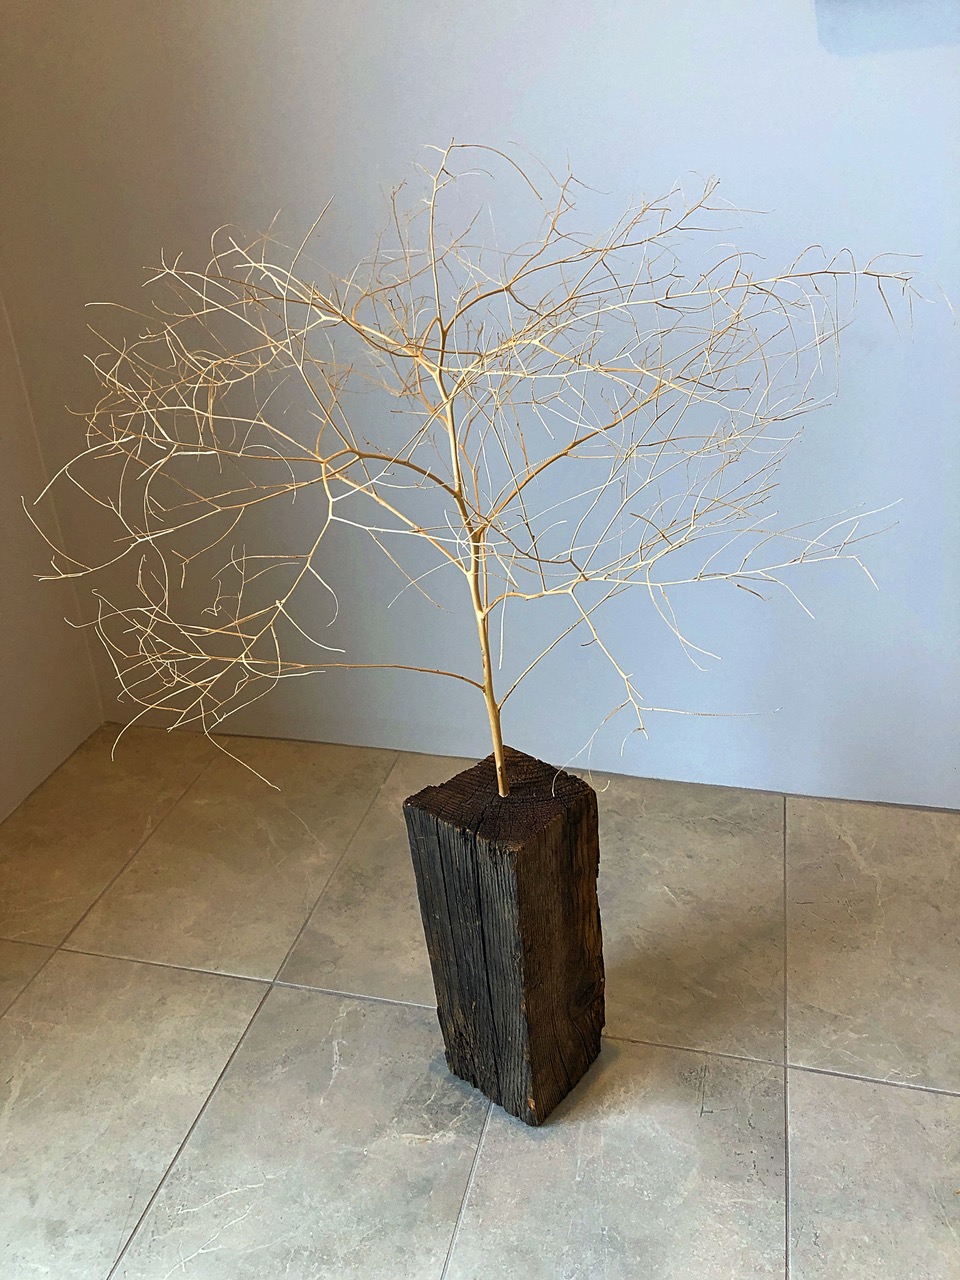 Bring the Wood, 2020 | Tumble weed and found wood block, 36” x 24” x 24" | 